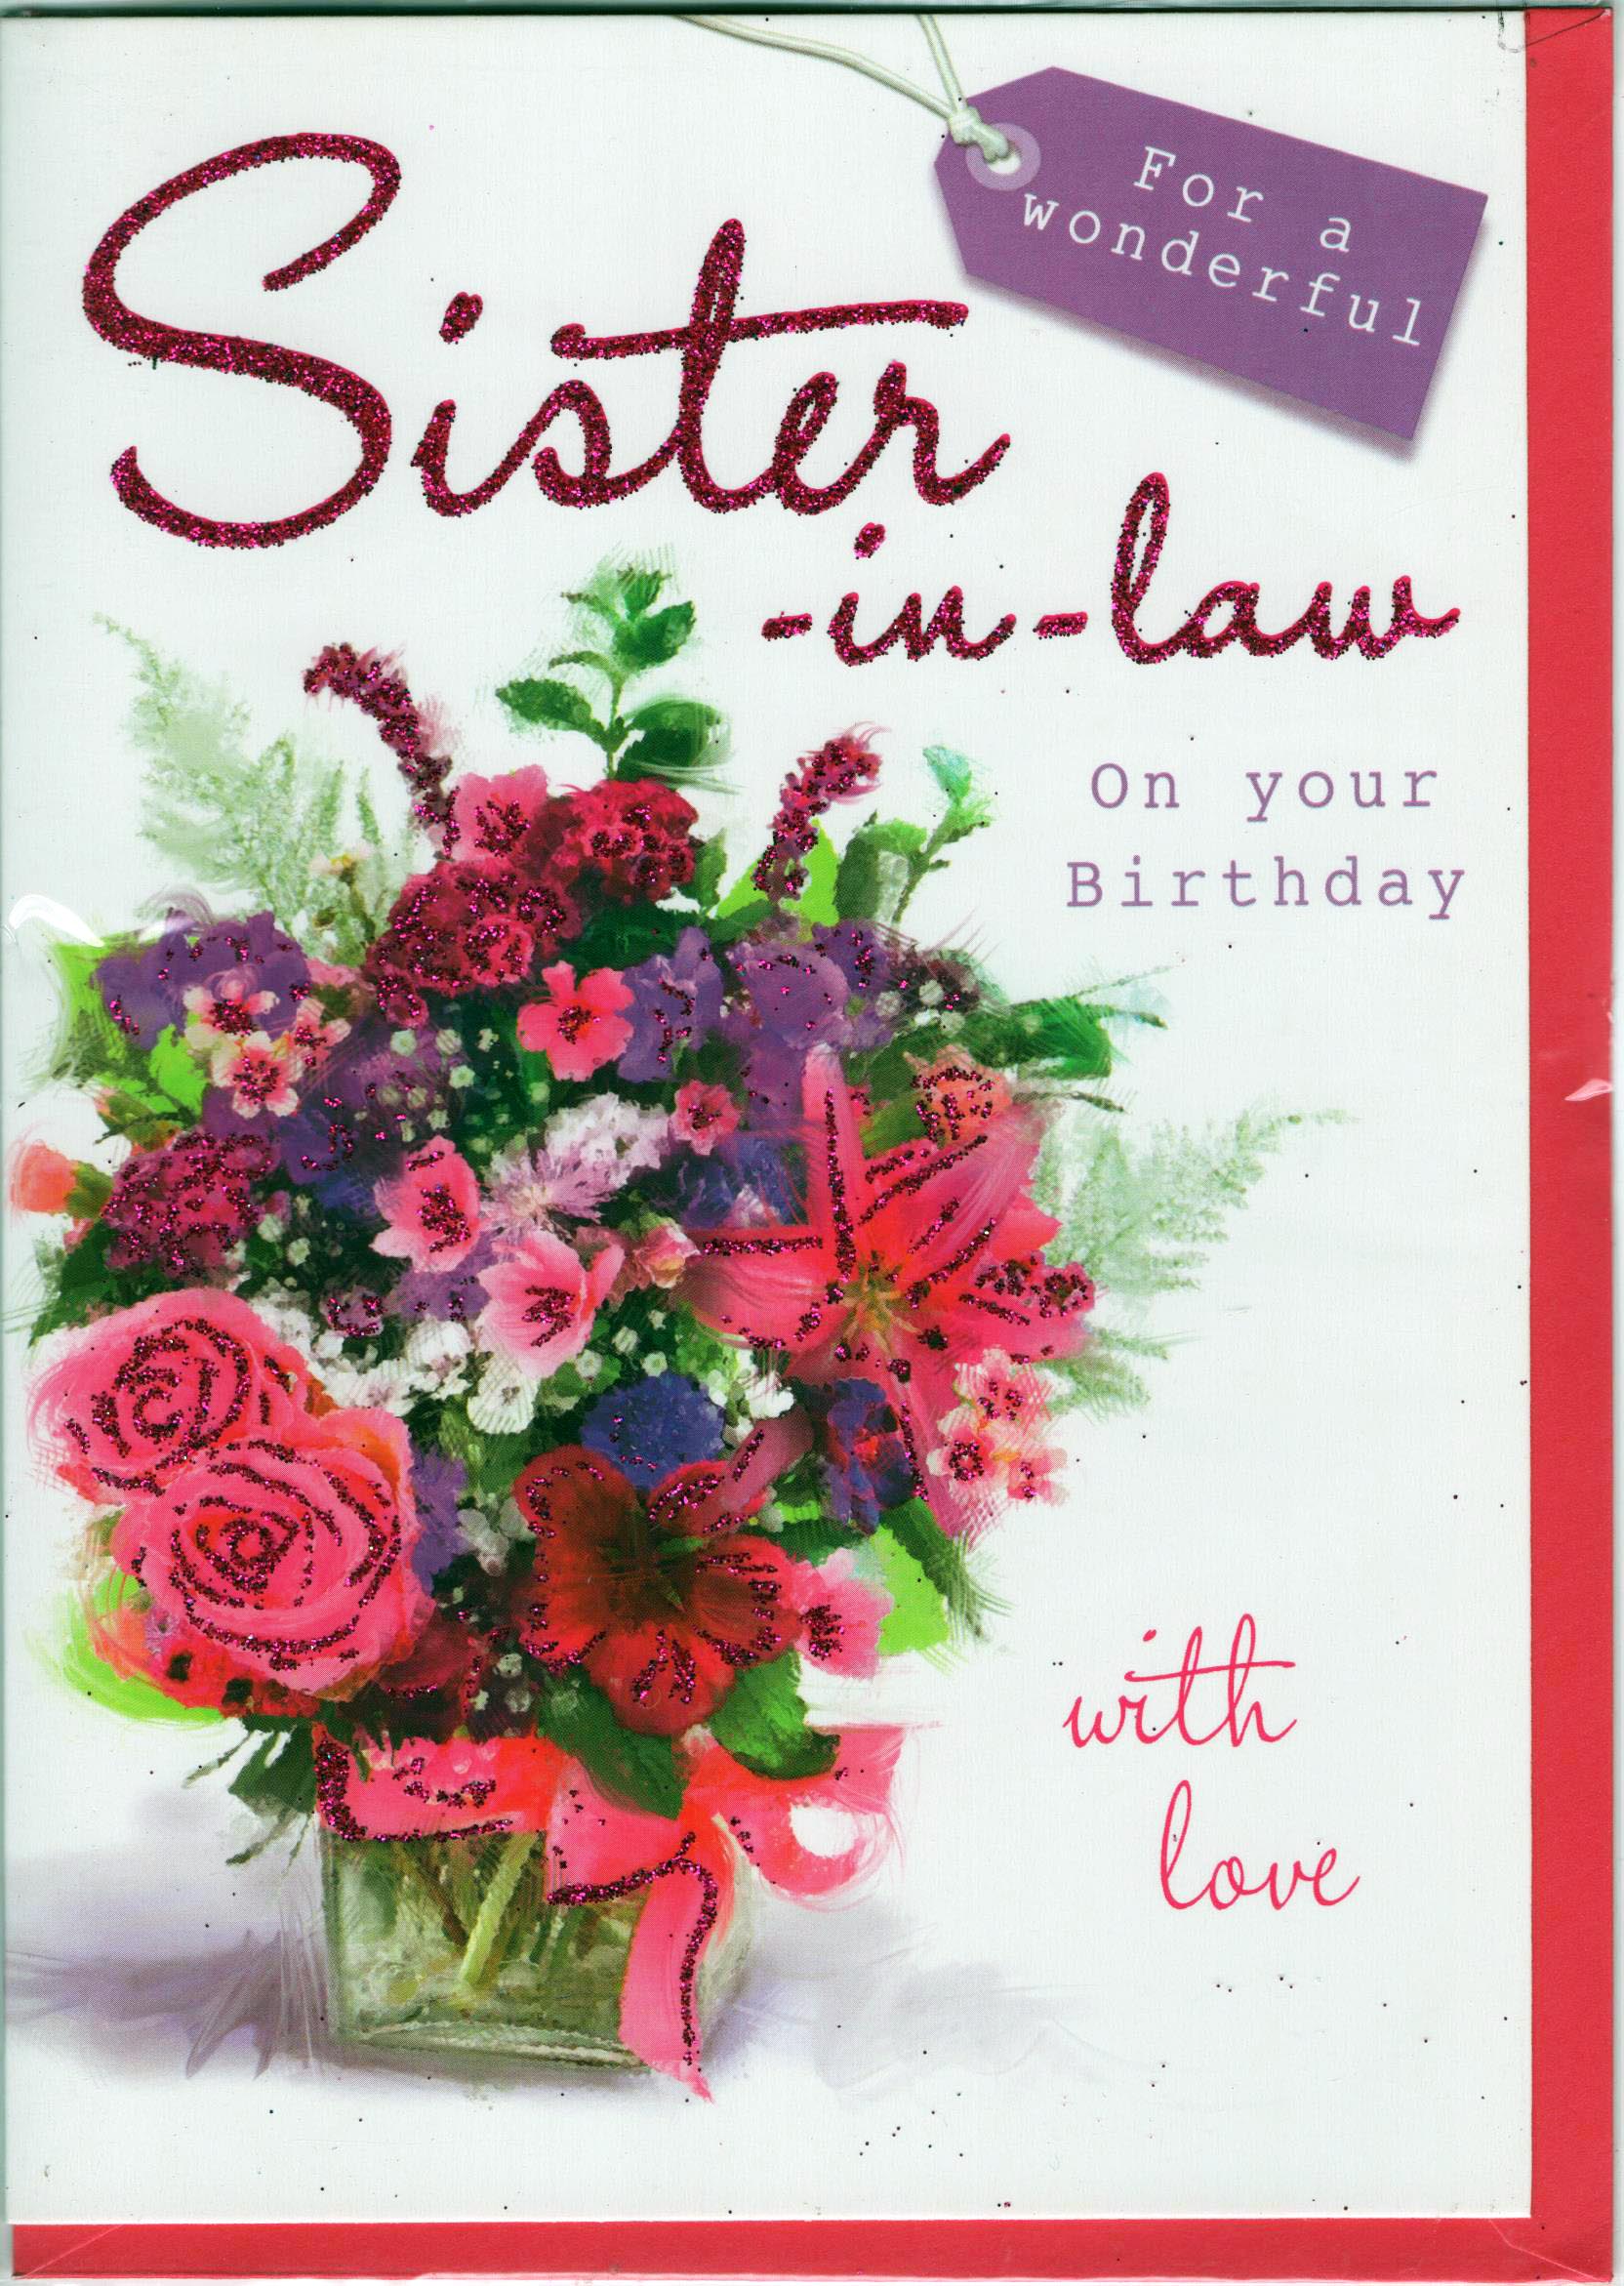 Sister in Law on your Birthday